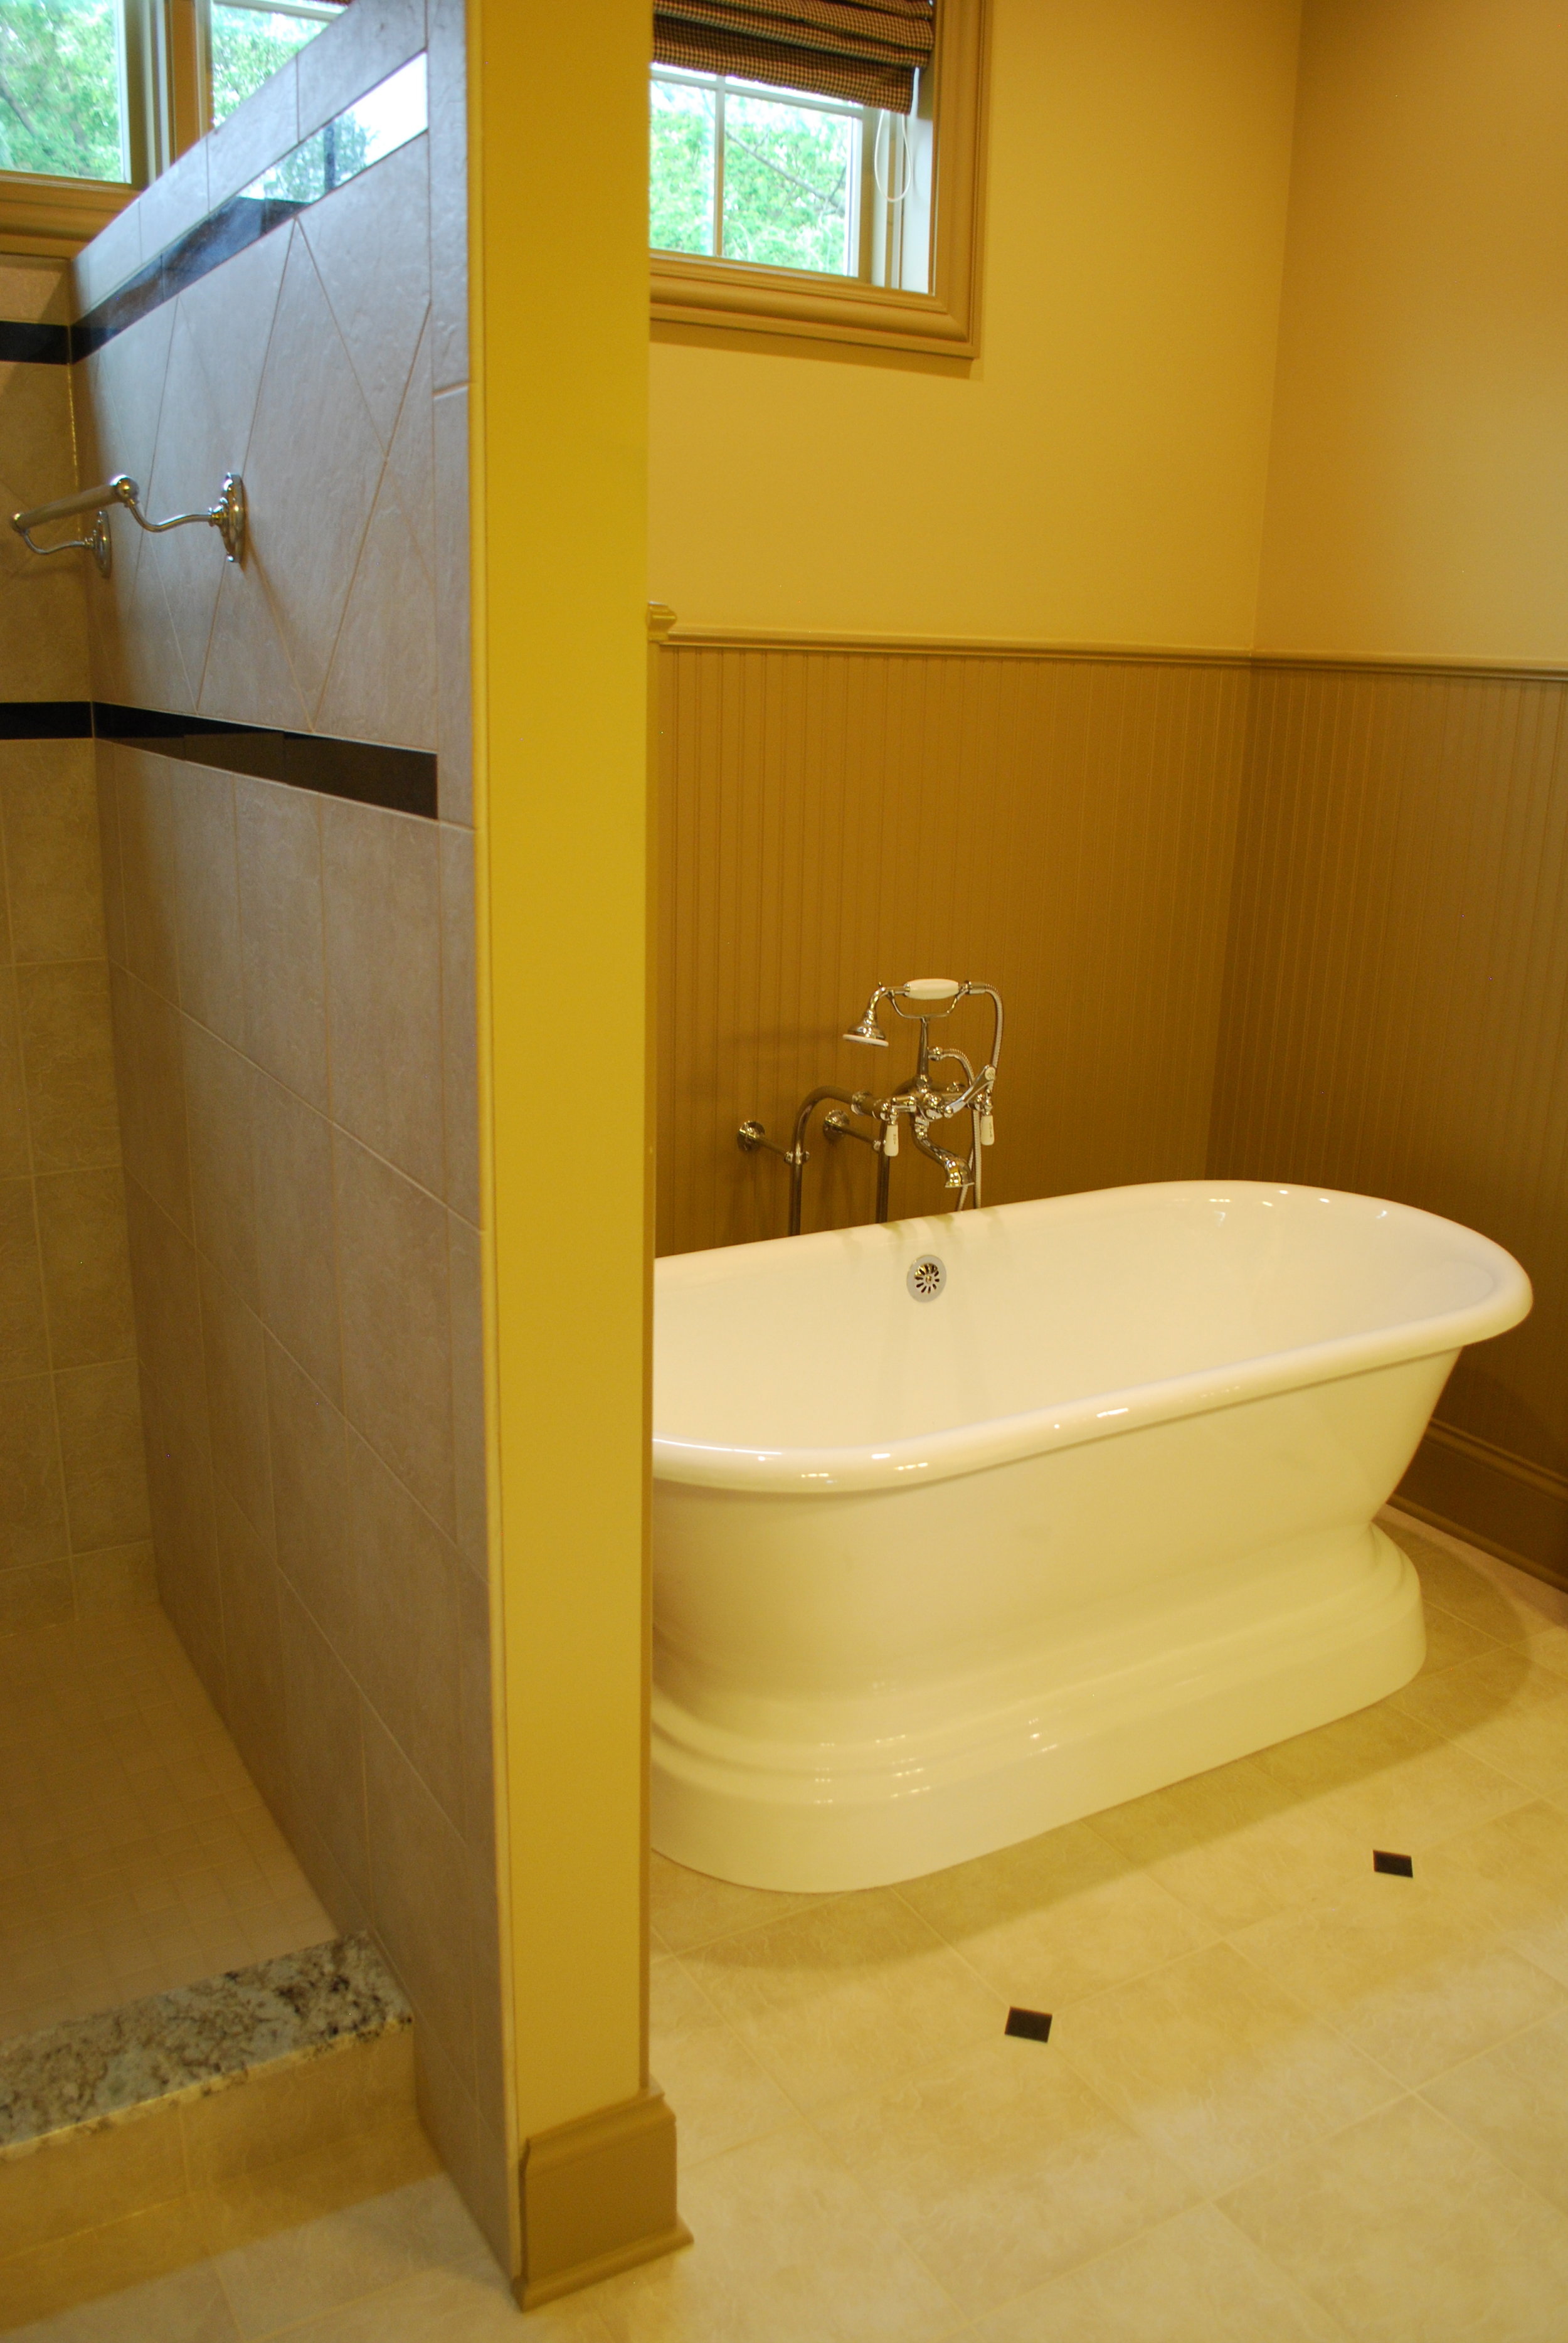 FREESTANDING TUB WITH WAINSCOTING IN GENEVA IL REMODEL 